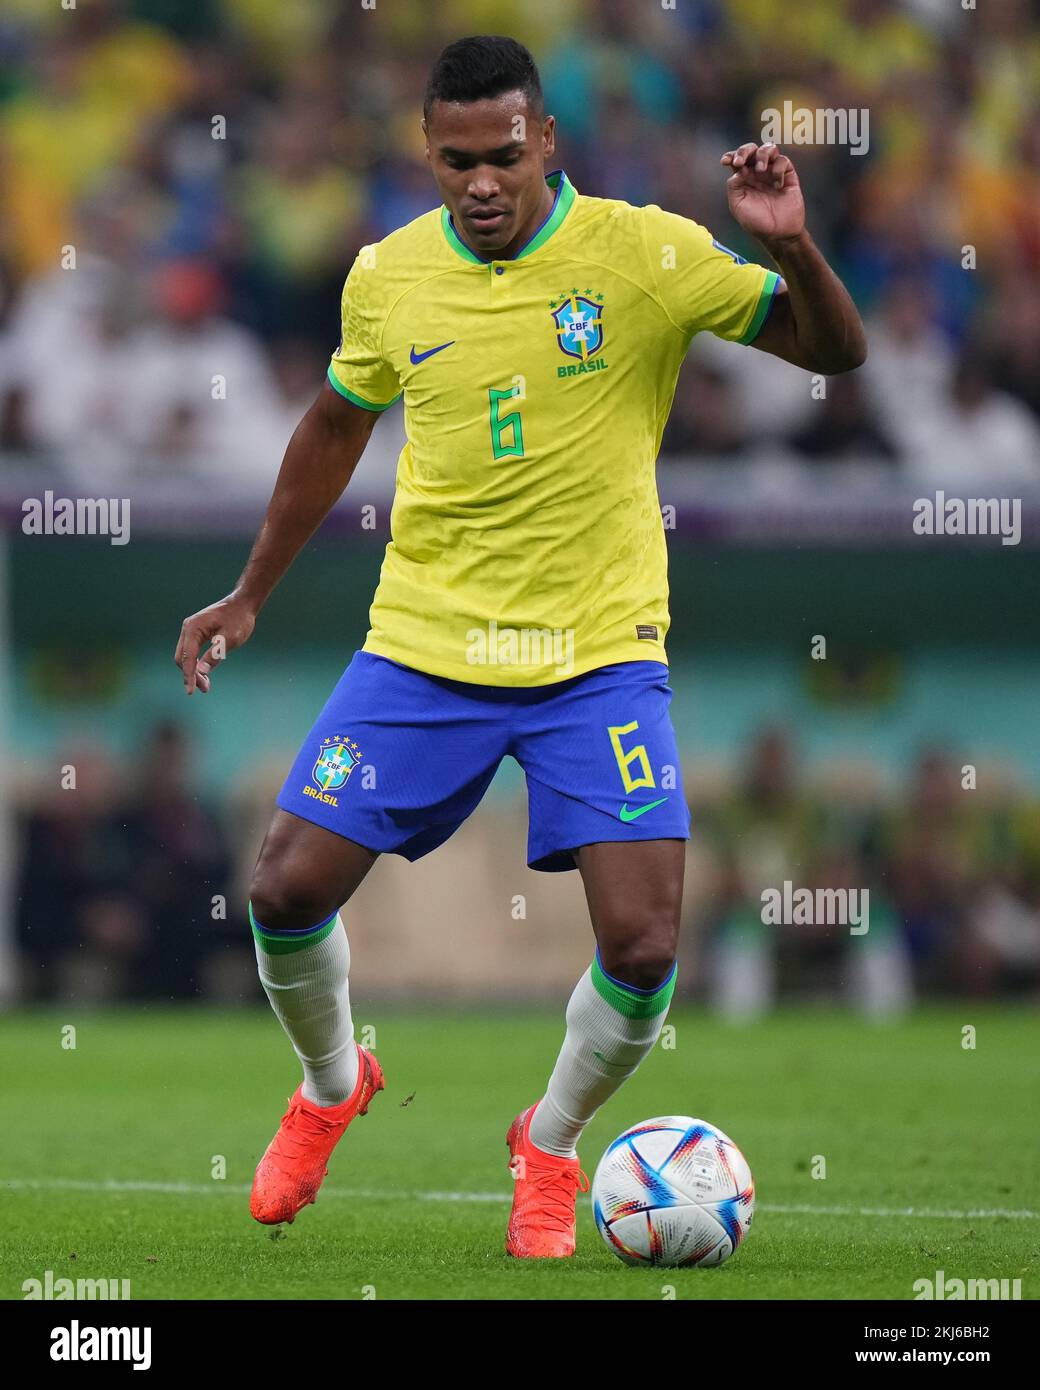 Alex Sandro of Brazil during the FIFA World Cup Qatar 2022 match, Group G, between Brazil and Serbia played at Lusail Stadium on Nov 24, 2022 in Lusail, Qatar. (Photo by Bagu Blanco / PRESSIN) Credit: PRESSINPHOTO SPORTS AGENCY/Alamy Live News Stock Photo